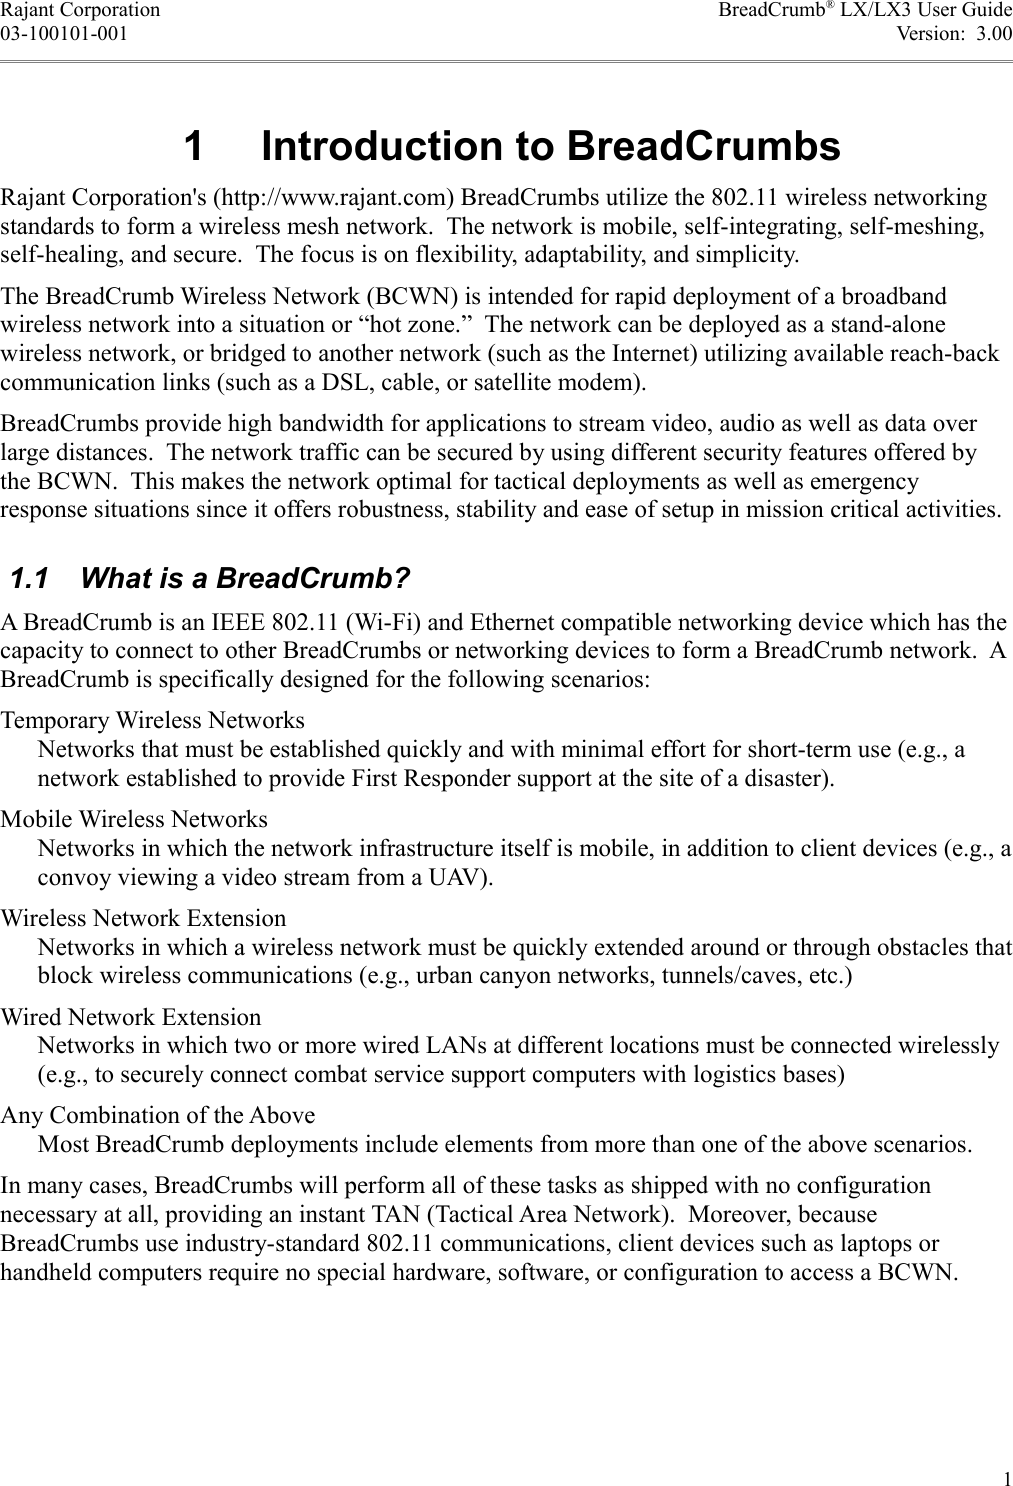 Rajant Corporation BreadCrumb® LX/LX3 User Guide03-100101-001 Version:  3.00 1  Introduction to BreadCrumbsRajant Corporation&apos;s (http://www.rajant.com) BreadCrumbs utilize the 802.11 wireless networking standards to form a wireless mesh network.  The network is mobile, self-integrating, self-meshing, self-healing, and secure.  The focus is on flexibility, adaptability, and simplicity.The BreadCrumb Wireless Network (BCWN) is intended for rapid deployment of a broadband wireless network into a situation or “hot zone.”  The network can be deployed as a stand-alone wireless network, or bridged to another network (such as the Internet) utilizing available reach-back communication links (such as a DSL, cable, or satellite modem).BreadCrumbs provide high bandwidth for applications to stream video, audio as well as data over large distances.  The network traffic can be secured by using different security features offered by the BCWN.  This makes the network optimal for tactical deployments as well as emergency response situations since it offers robustness, stability and ease of setup in mission critical activities. 1.1  What is a BreadCrumb?A BreadCrumb is an IEEE 802.11 (Wi-Fi) and Ethernet compatible networking device which has the capacity to connect to other BreadCrumbs or networking devices to form a BreadCrumb network.  A BreadCrumb is specifically designed for the following scenarios:Temporary Wireless NetworksNetworks that must be established quickly and with minimal effort for short-term use (e.g., a network established to provide First Responder support at the site of a disaster).Mobile Wireless NetworksNetworks in which the network infrastructure itself is mobile, in addition to client devices (e.g., a convoy viewing a video stream from a UAV).Wireless Network ExtensionNetworks in which a wireless network must be quickly extended around or through obstacles that block wireless communications (e.g., urban canyon networks, tunnels/caves, etc.)Wired Network ExtensionNetworks in which two or more wired LANs at different locations must be connected wirelessly (e.g., to securely connect combat service support computers with logistics bases)Any Combination of the AboveMost BreadCrumb deployments include elements from more than one of the above scenarios.In many cases, BreadCrumbs will perform all of these tasks as shipped with no configuration necessary at all, providing an instant TAN (Tactical Area Network).  Moreover, because BreadCrumbs use industry-standard 802.11 communications, client devices such as laptops or handheld computers require no special hardware, software, or configuration to access a BCWN.1